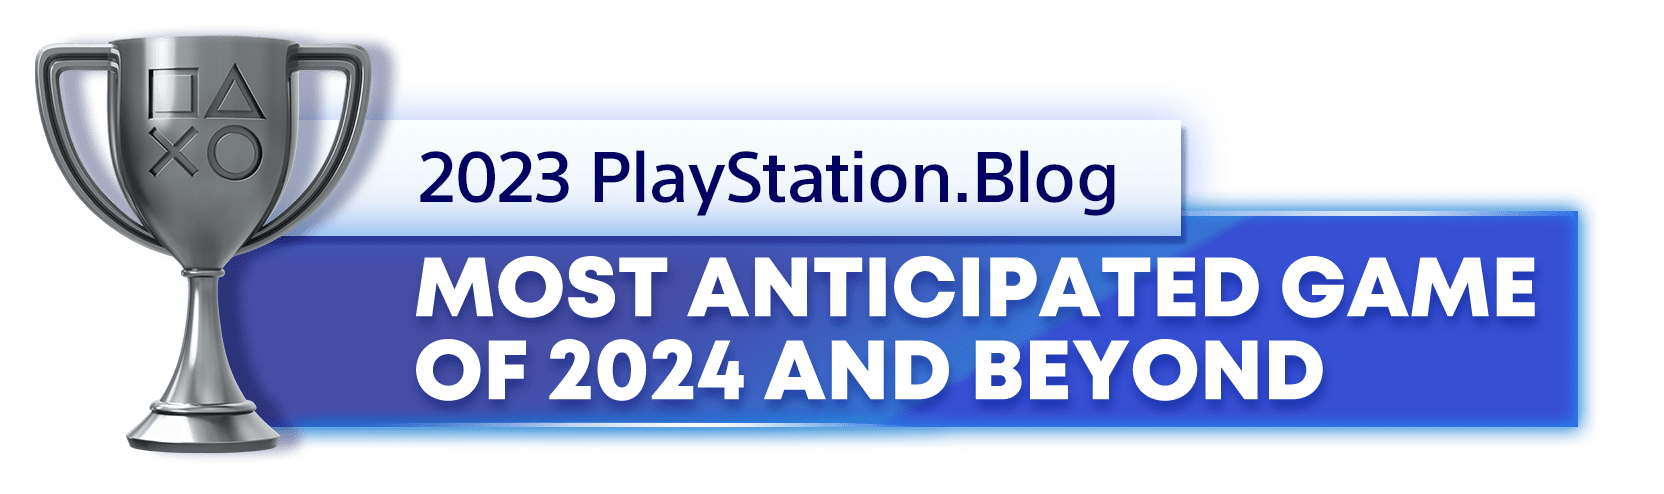  Silver Trophy for the 2023 PlayStation Blog Most Anticipated PlayStation Game of 2024 and Beyond Winner